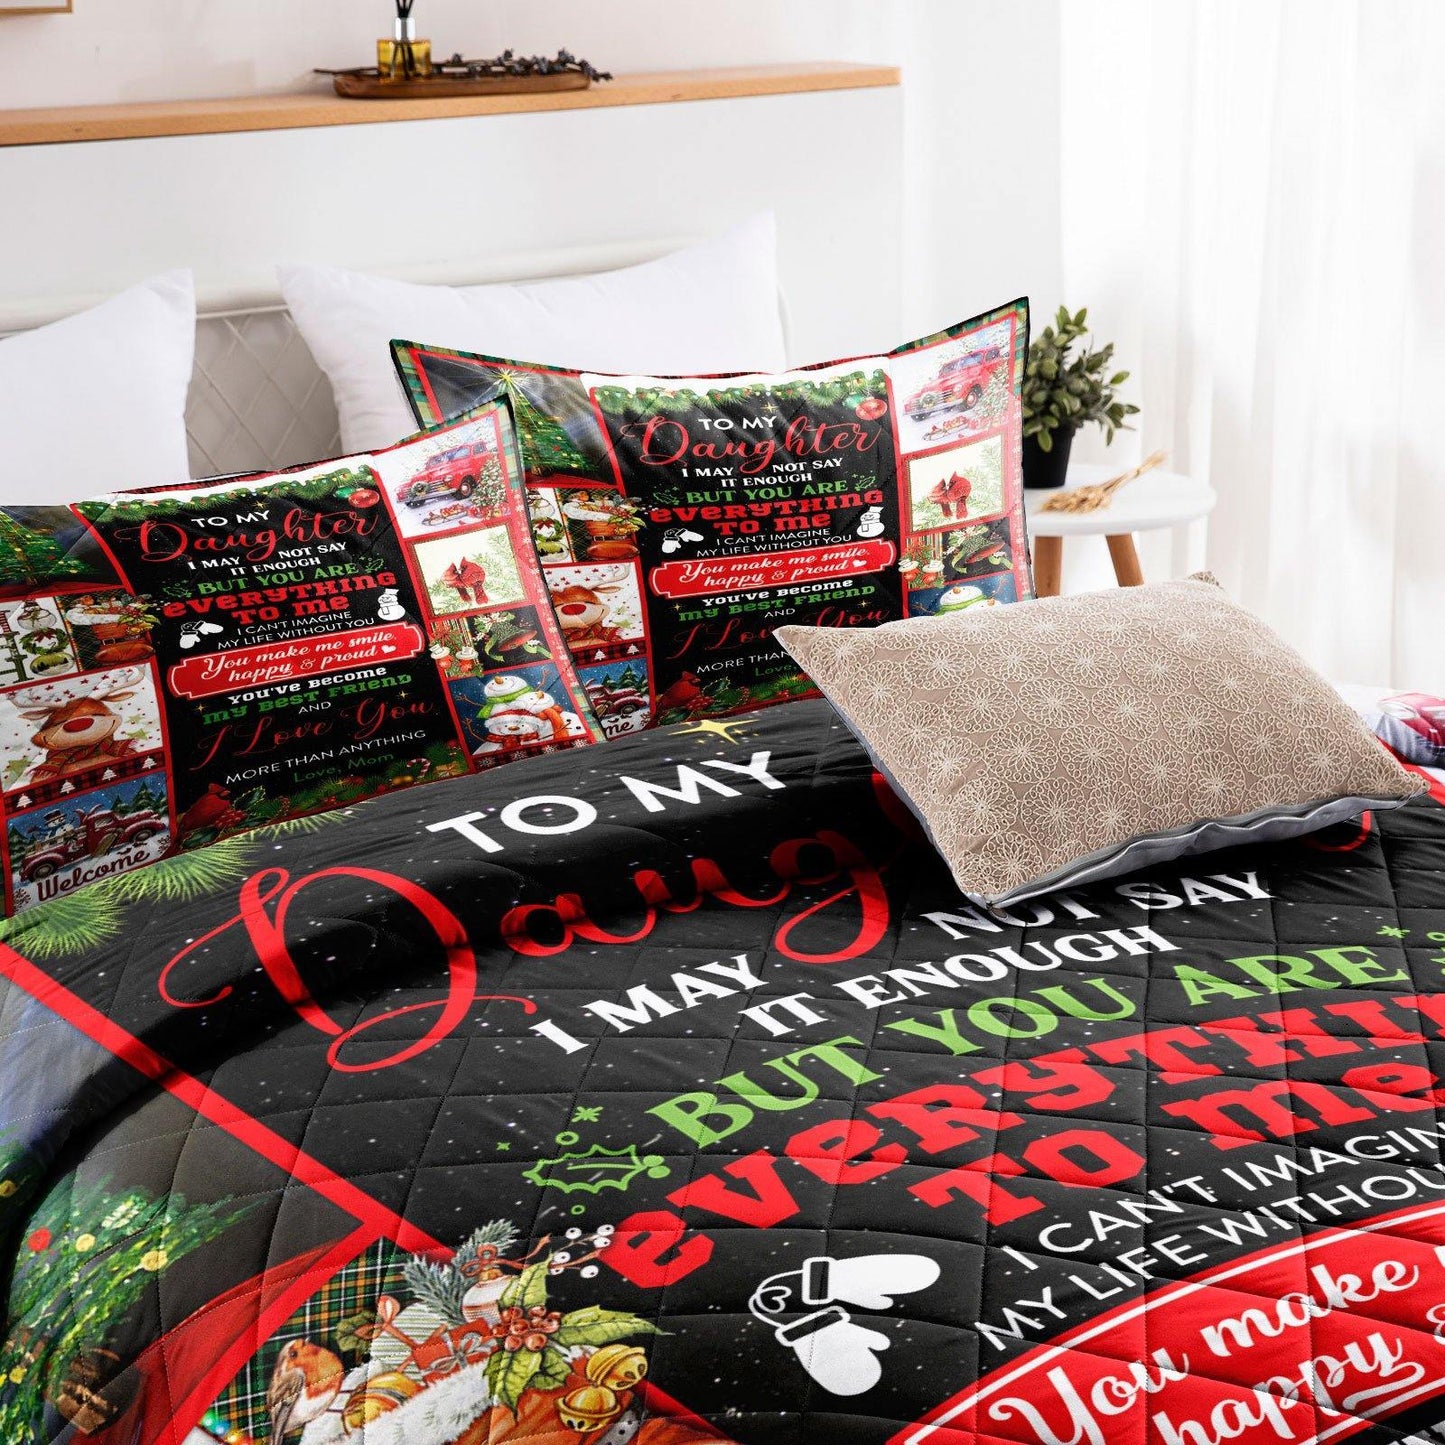 Wongs Bedding Christmas pattern quilt set（Complimentary 2 pieces of 18"*30" pillowcases） - Beddinger